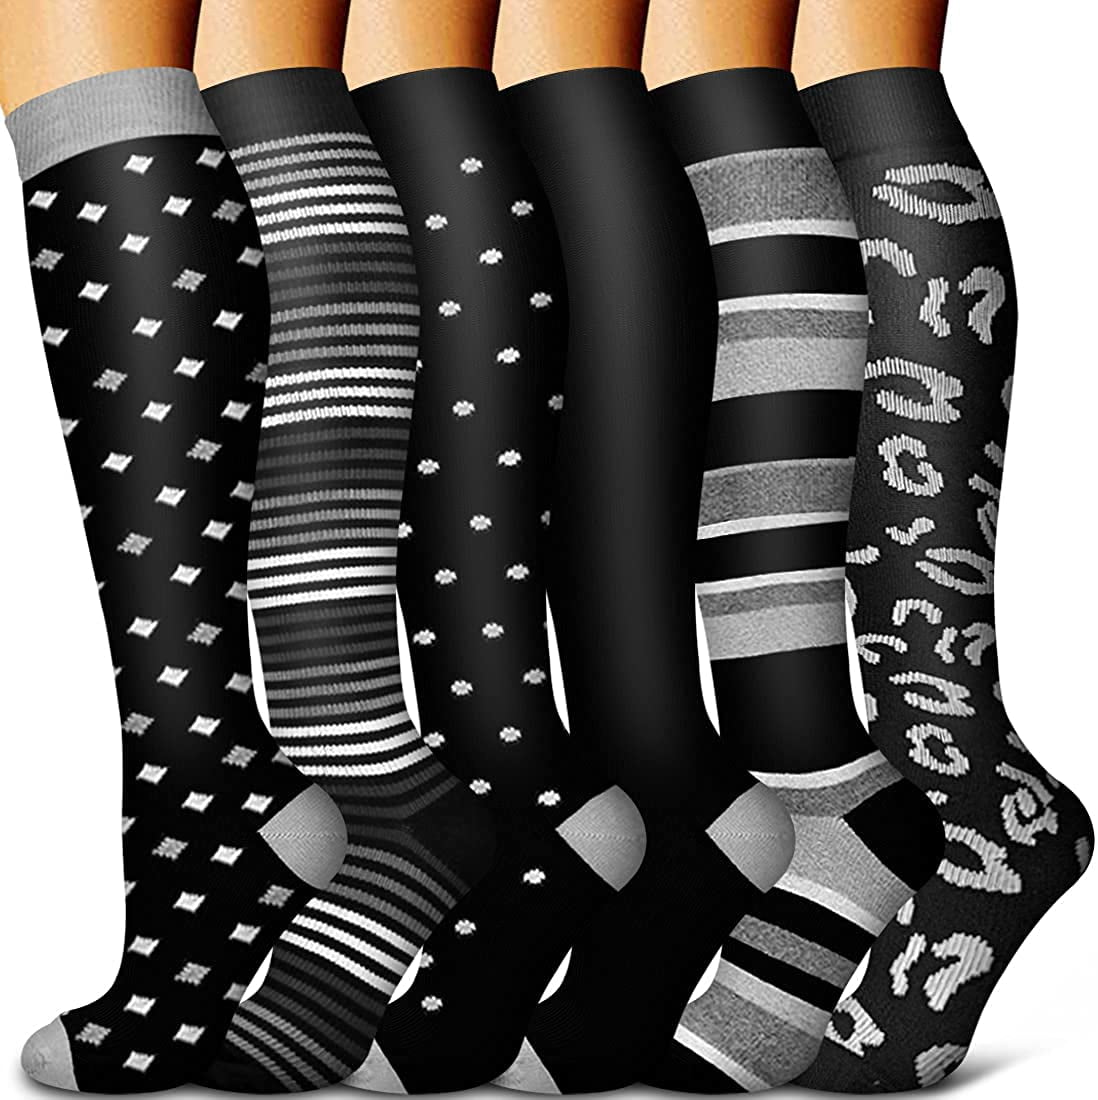 for Best Athletic,Circulation & Recovery 6 Pairs of Man's and Woman's Sports Compression Socks 15-20mmHg 